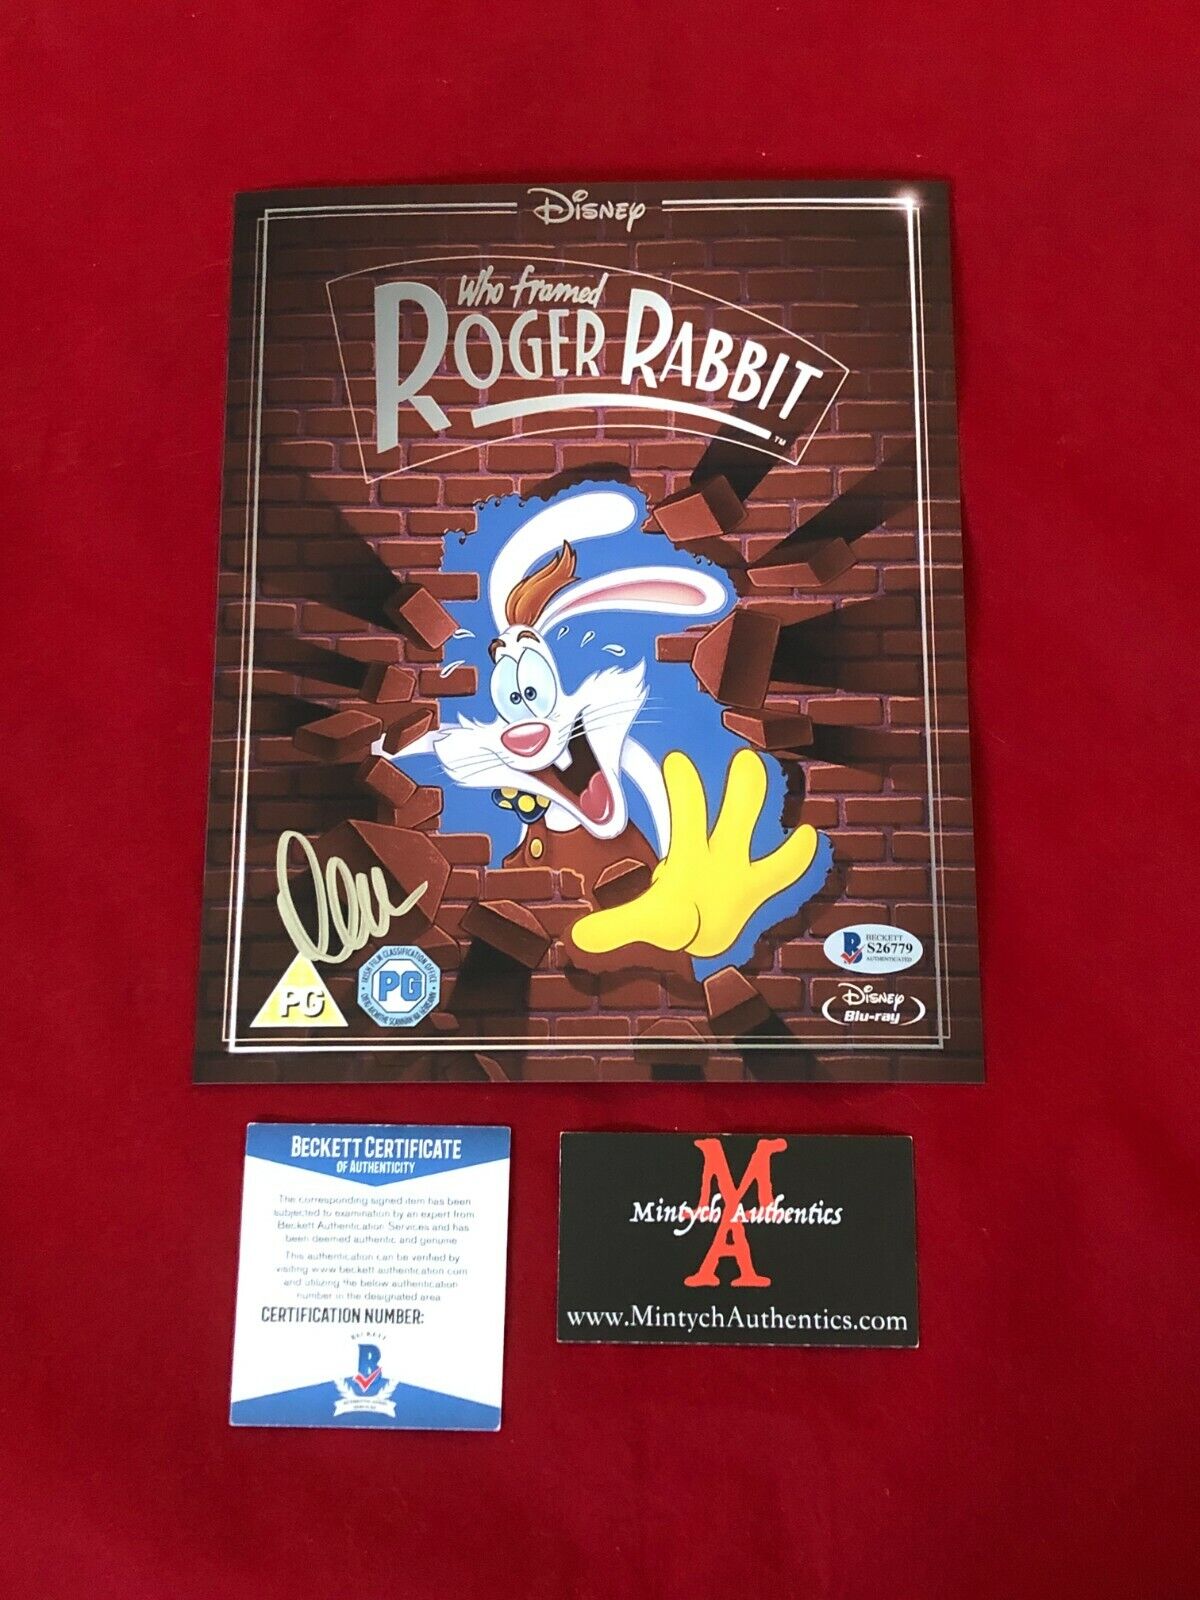 CHARLES FLEISCHER AUTOGRAPHED SIGNED 8X10 Photo Poster painting! WHO FRAMED ROGER RABBIT BECKETT